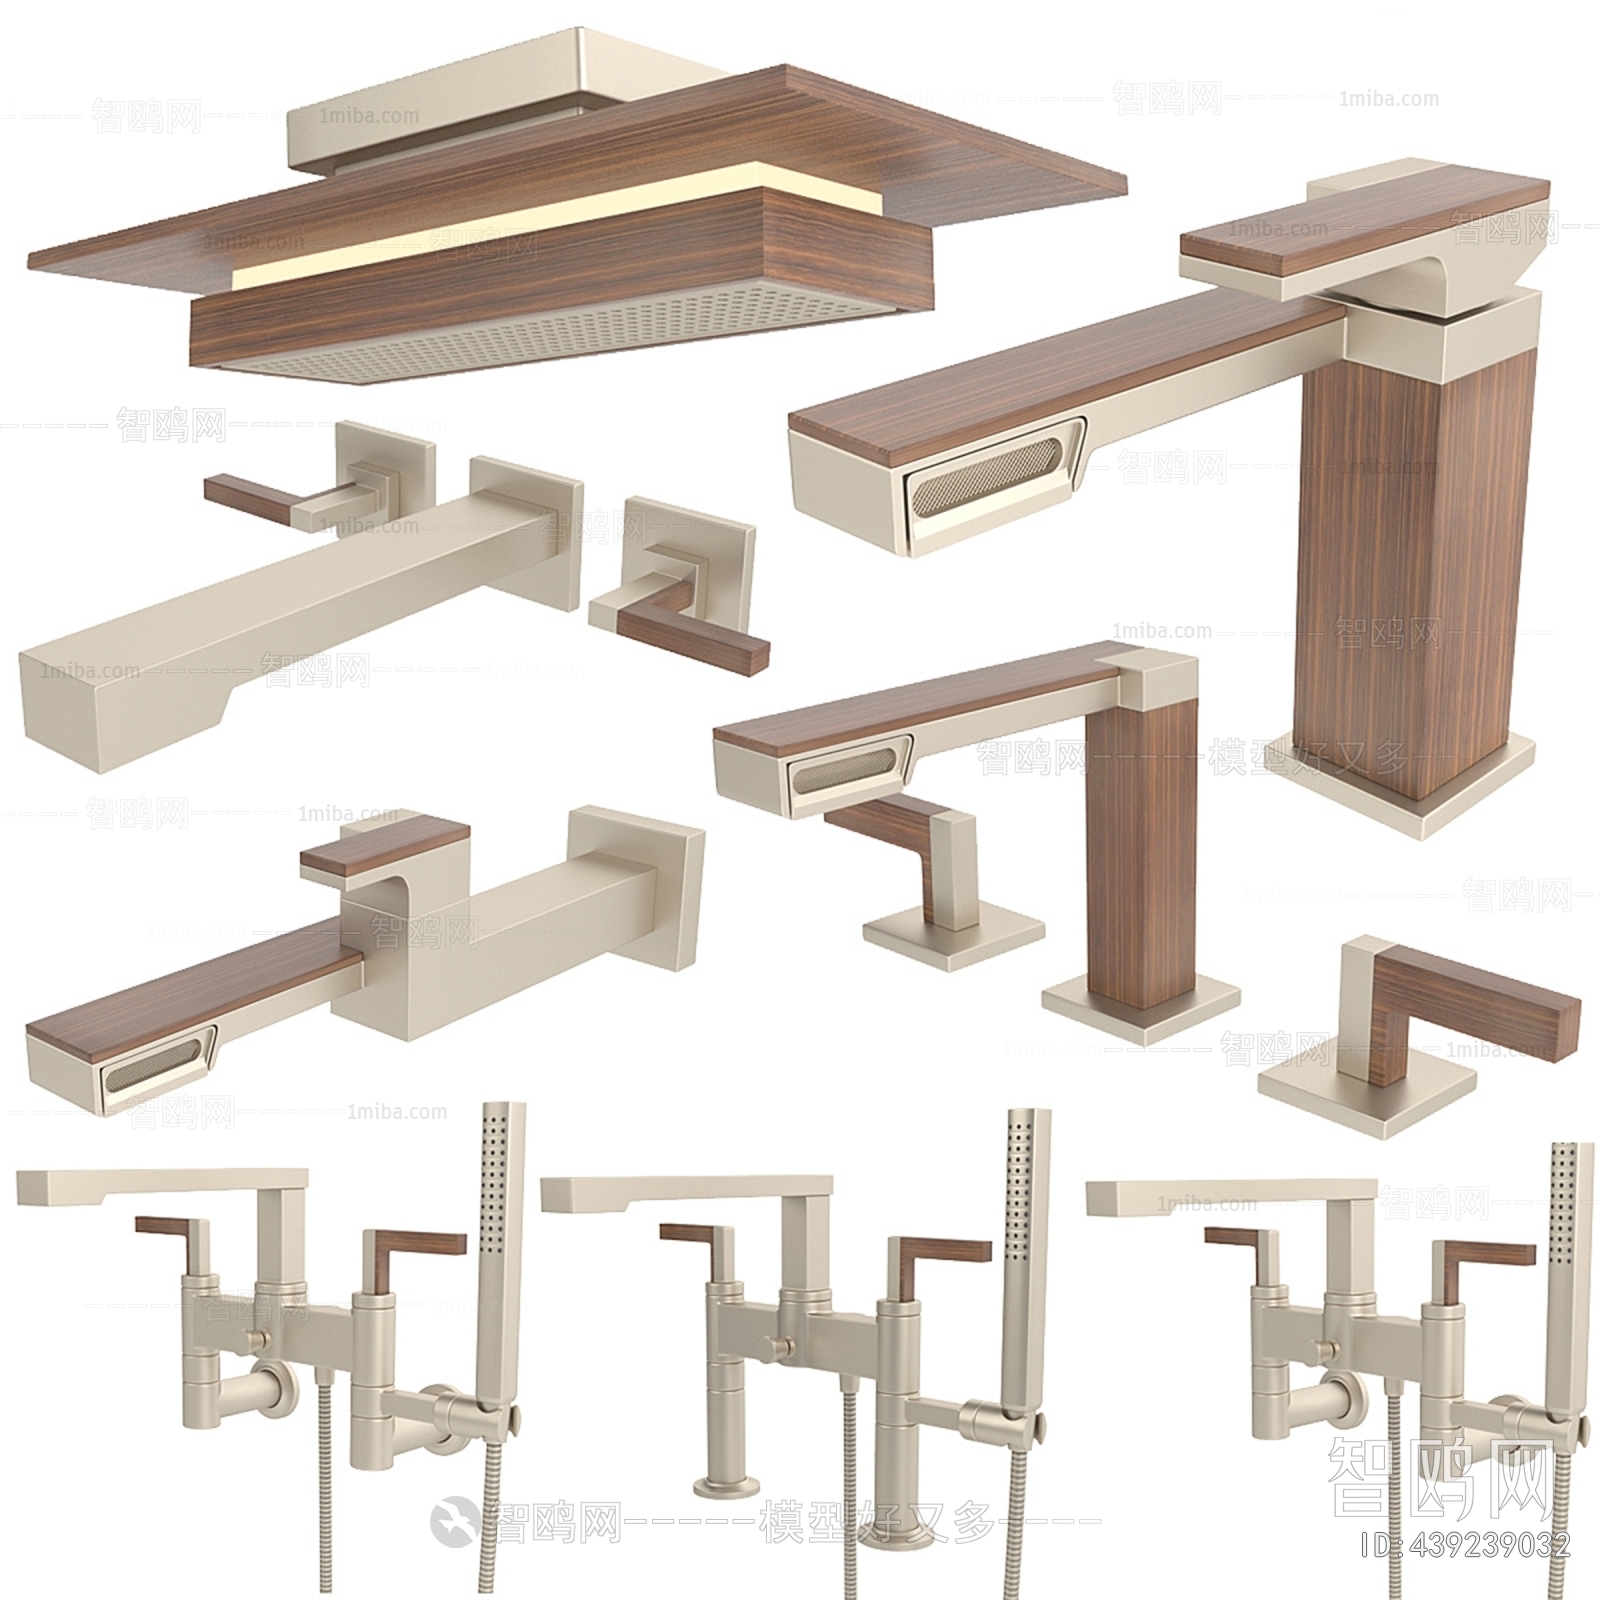 American Style Faucet/Shower